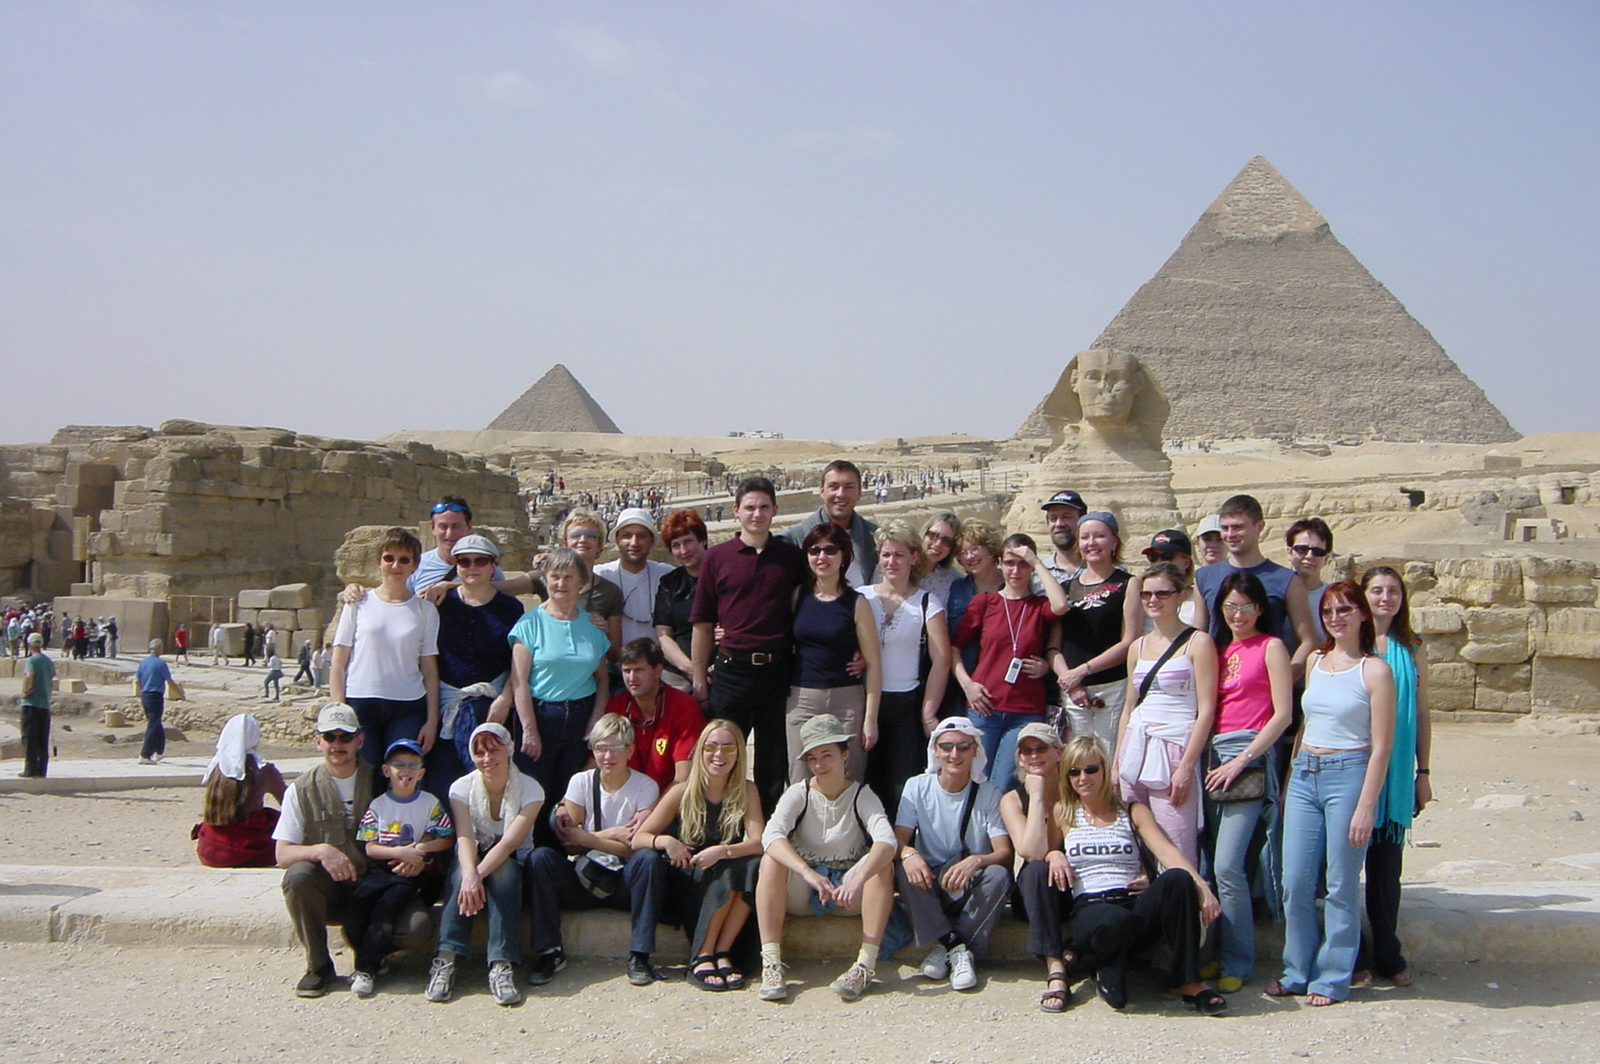 
At the Egyptian Pyramids